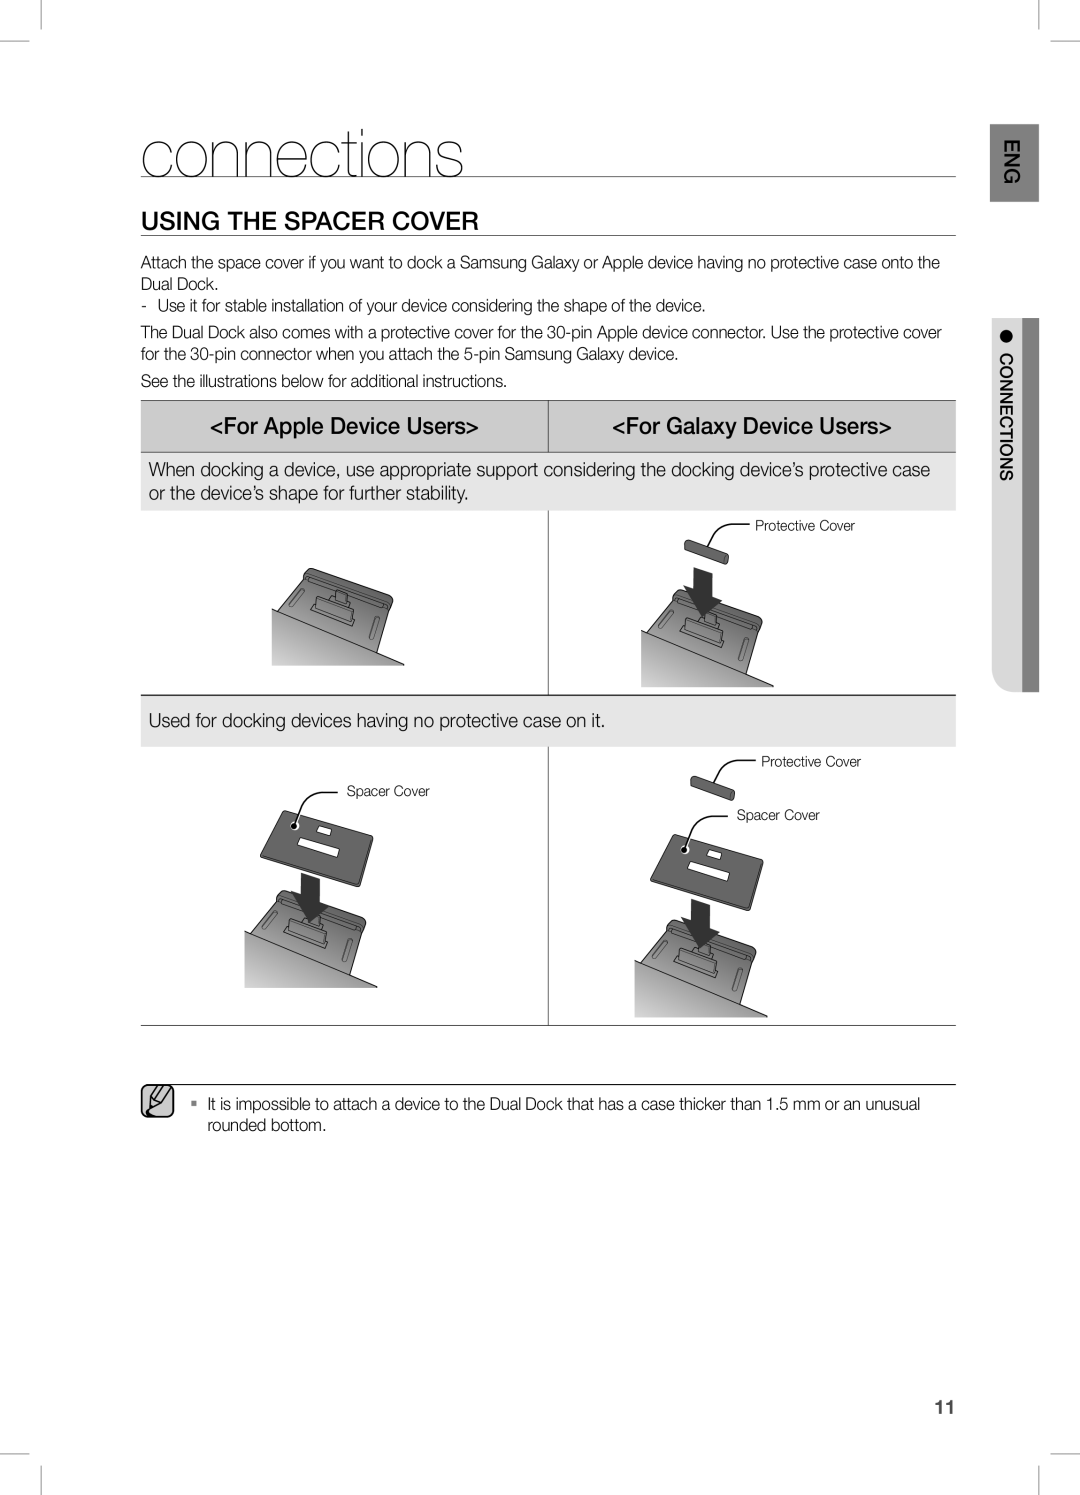 Samsung DA-E570 user manual connections, Using the sPacer coVer, for apple device Users, for galaxy device Users 